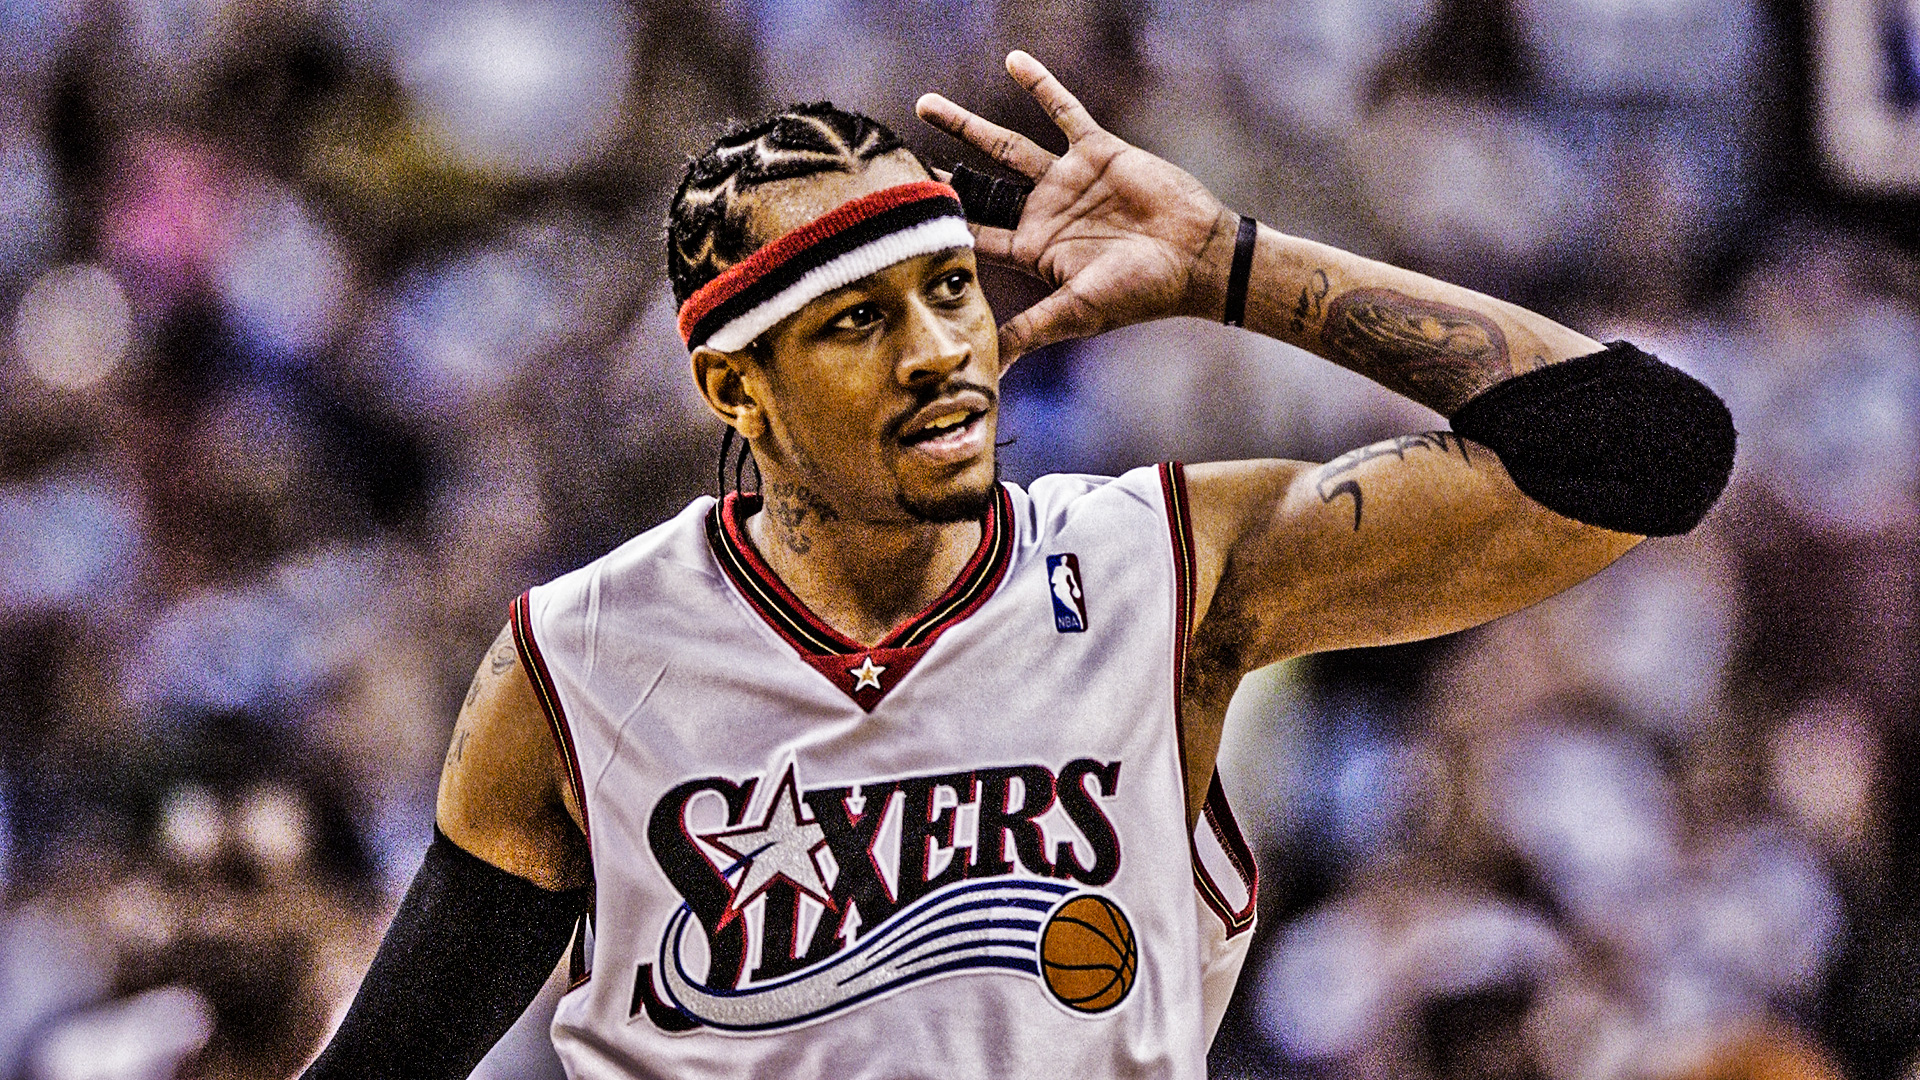 iverson wallpaper,basketball player,player,team sport,jersey,forehead